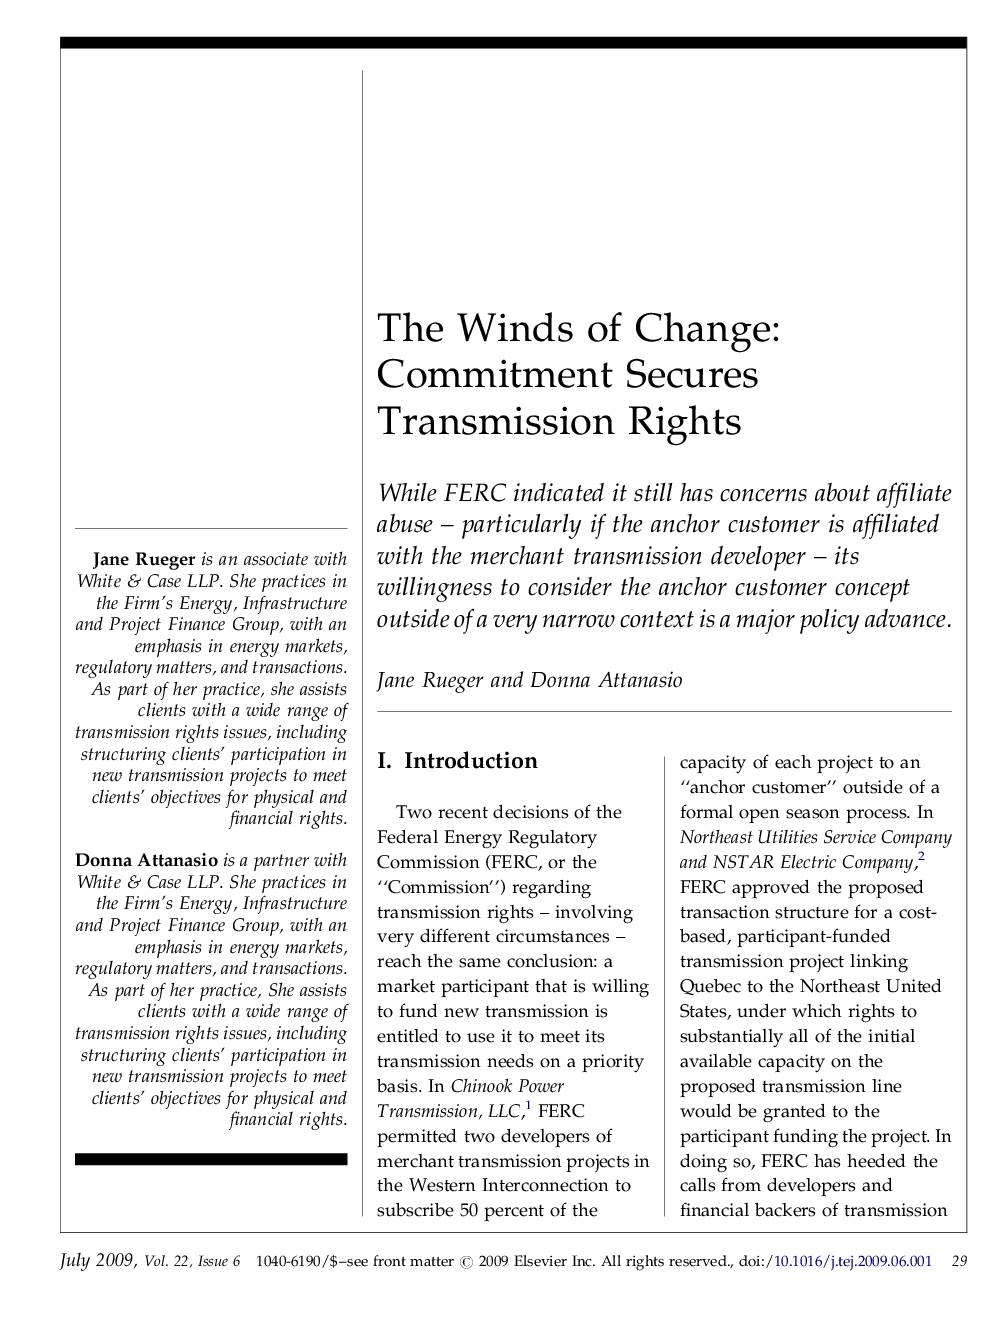 The Winds of Change: Commitment Secures Transmission Rights